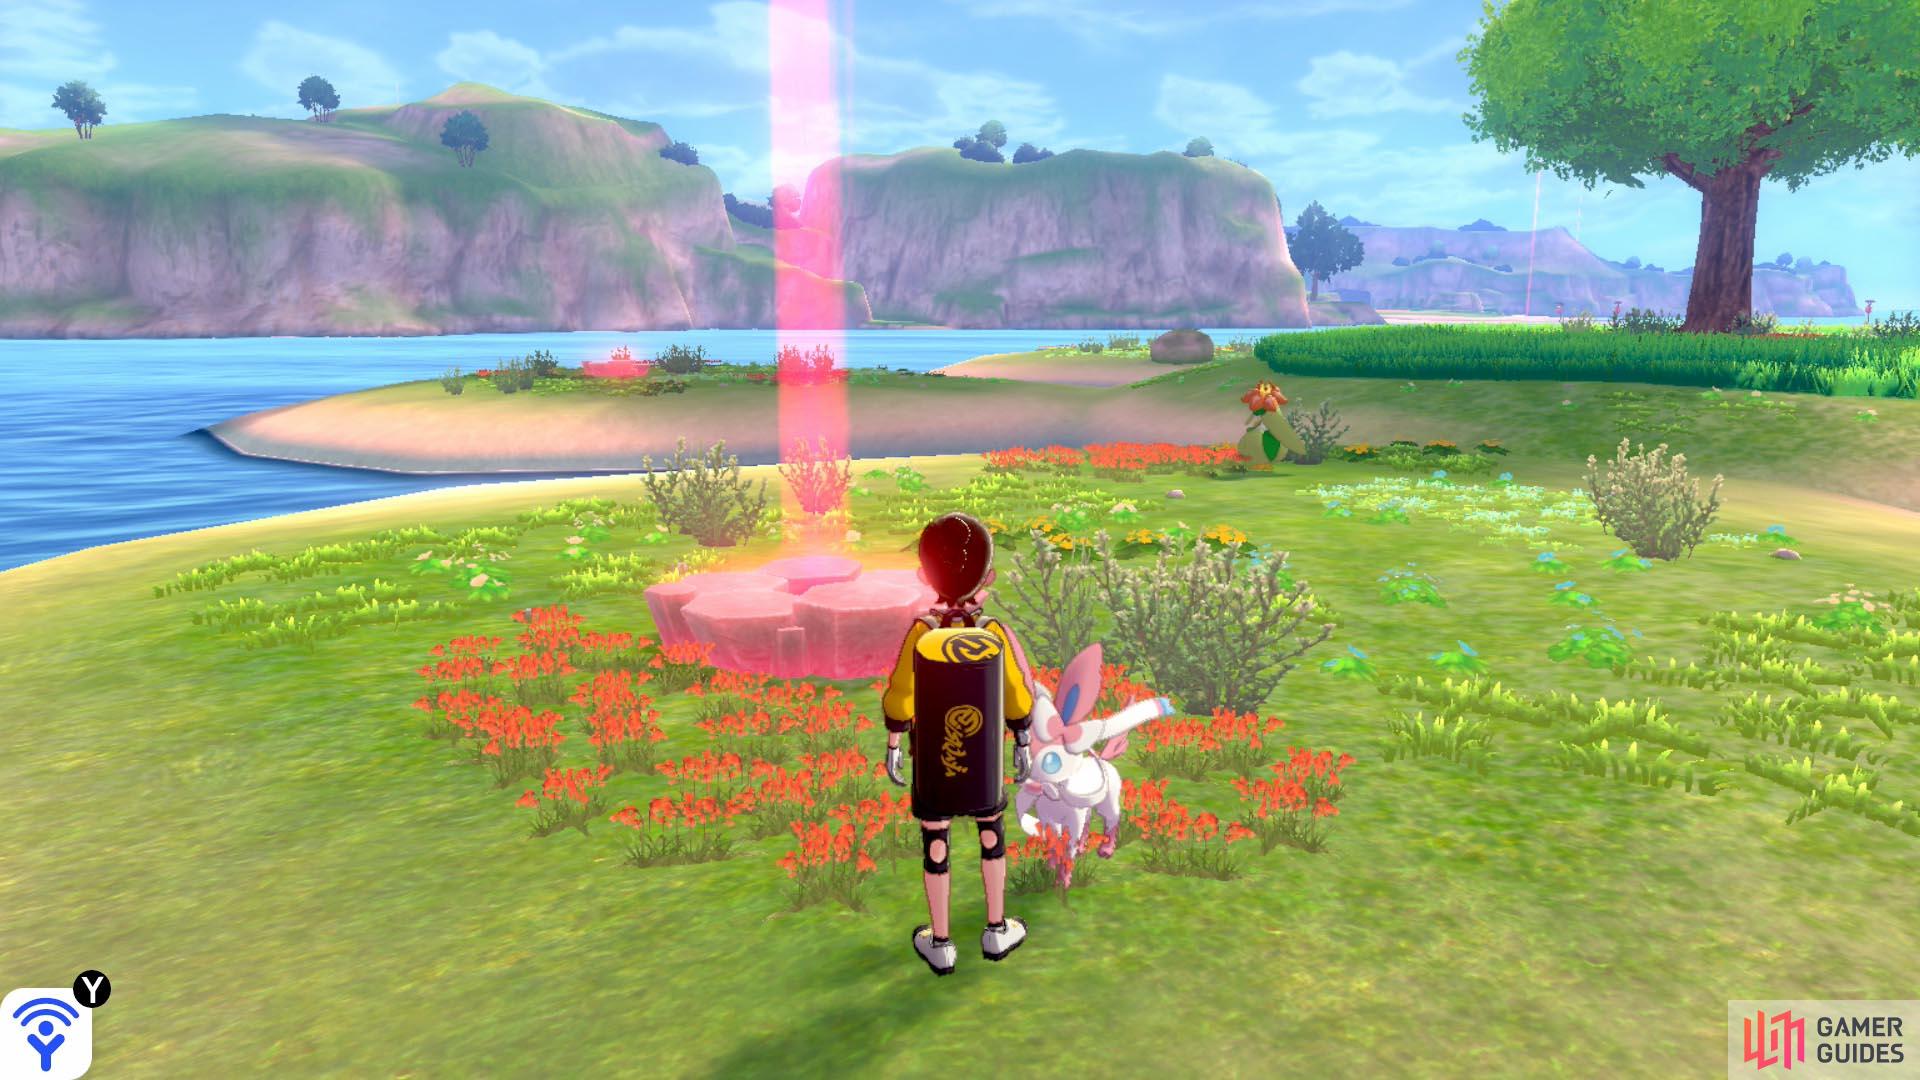 There are six dens, each located on one of the "petals" of the island. All dens feature the same list of Pokémon.